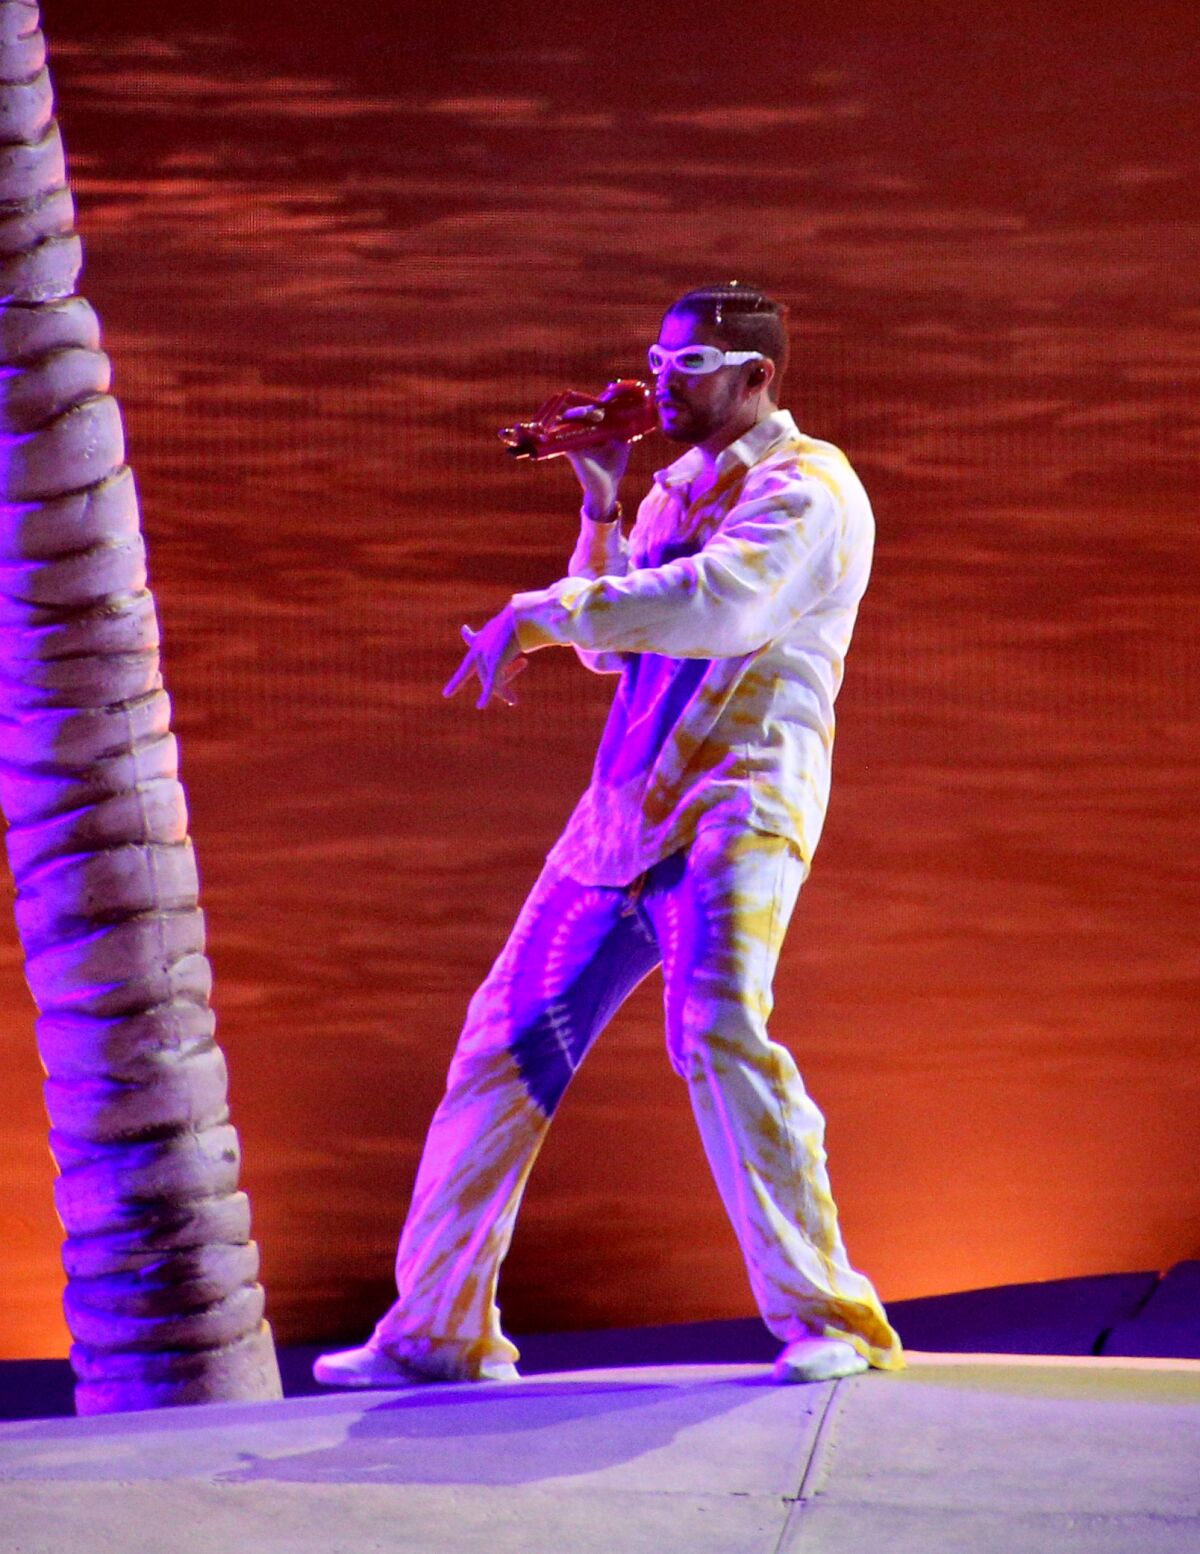 A Latin American singer/rapper performs on stage